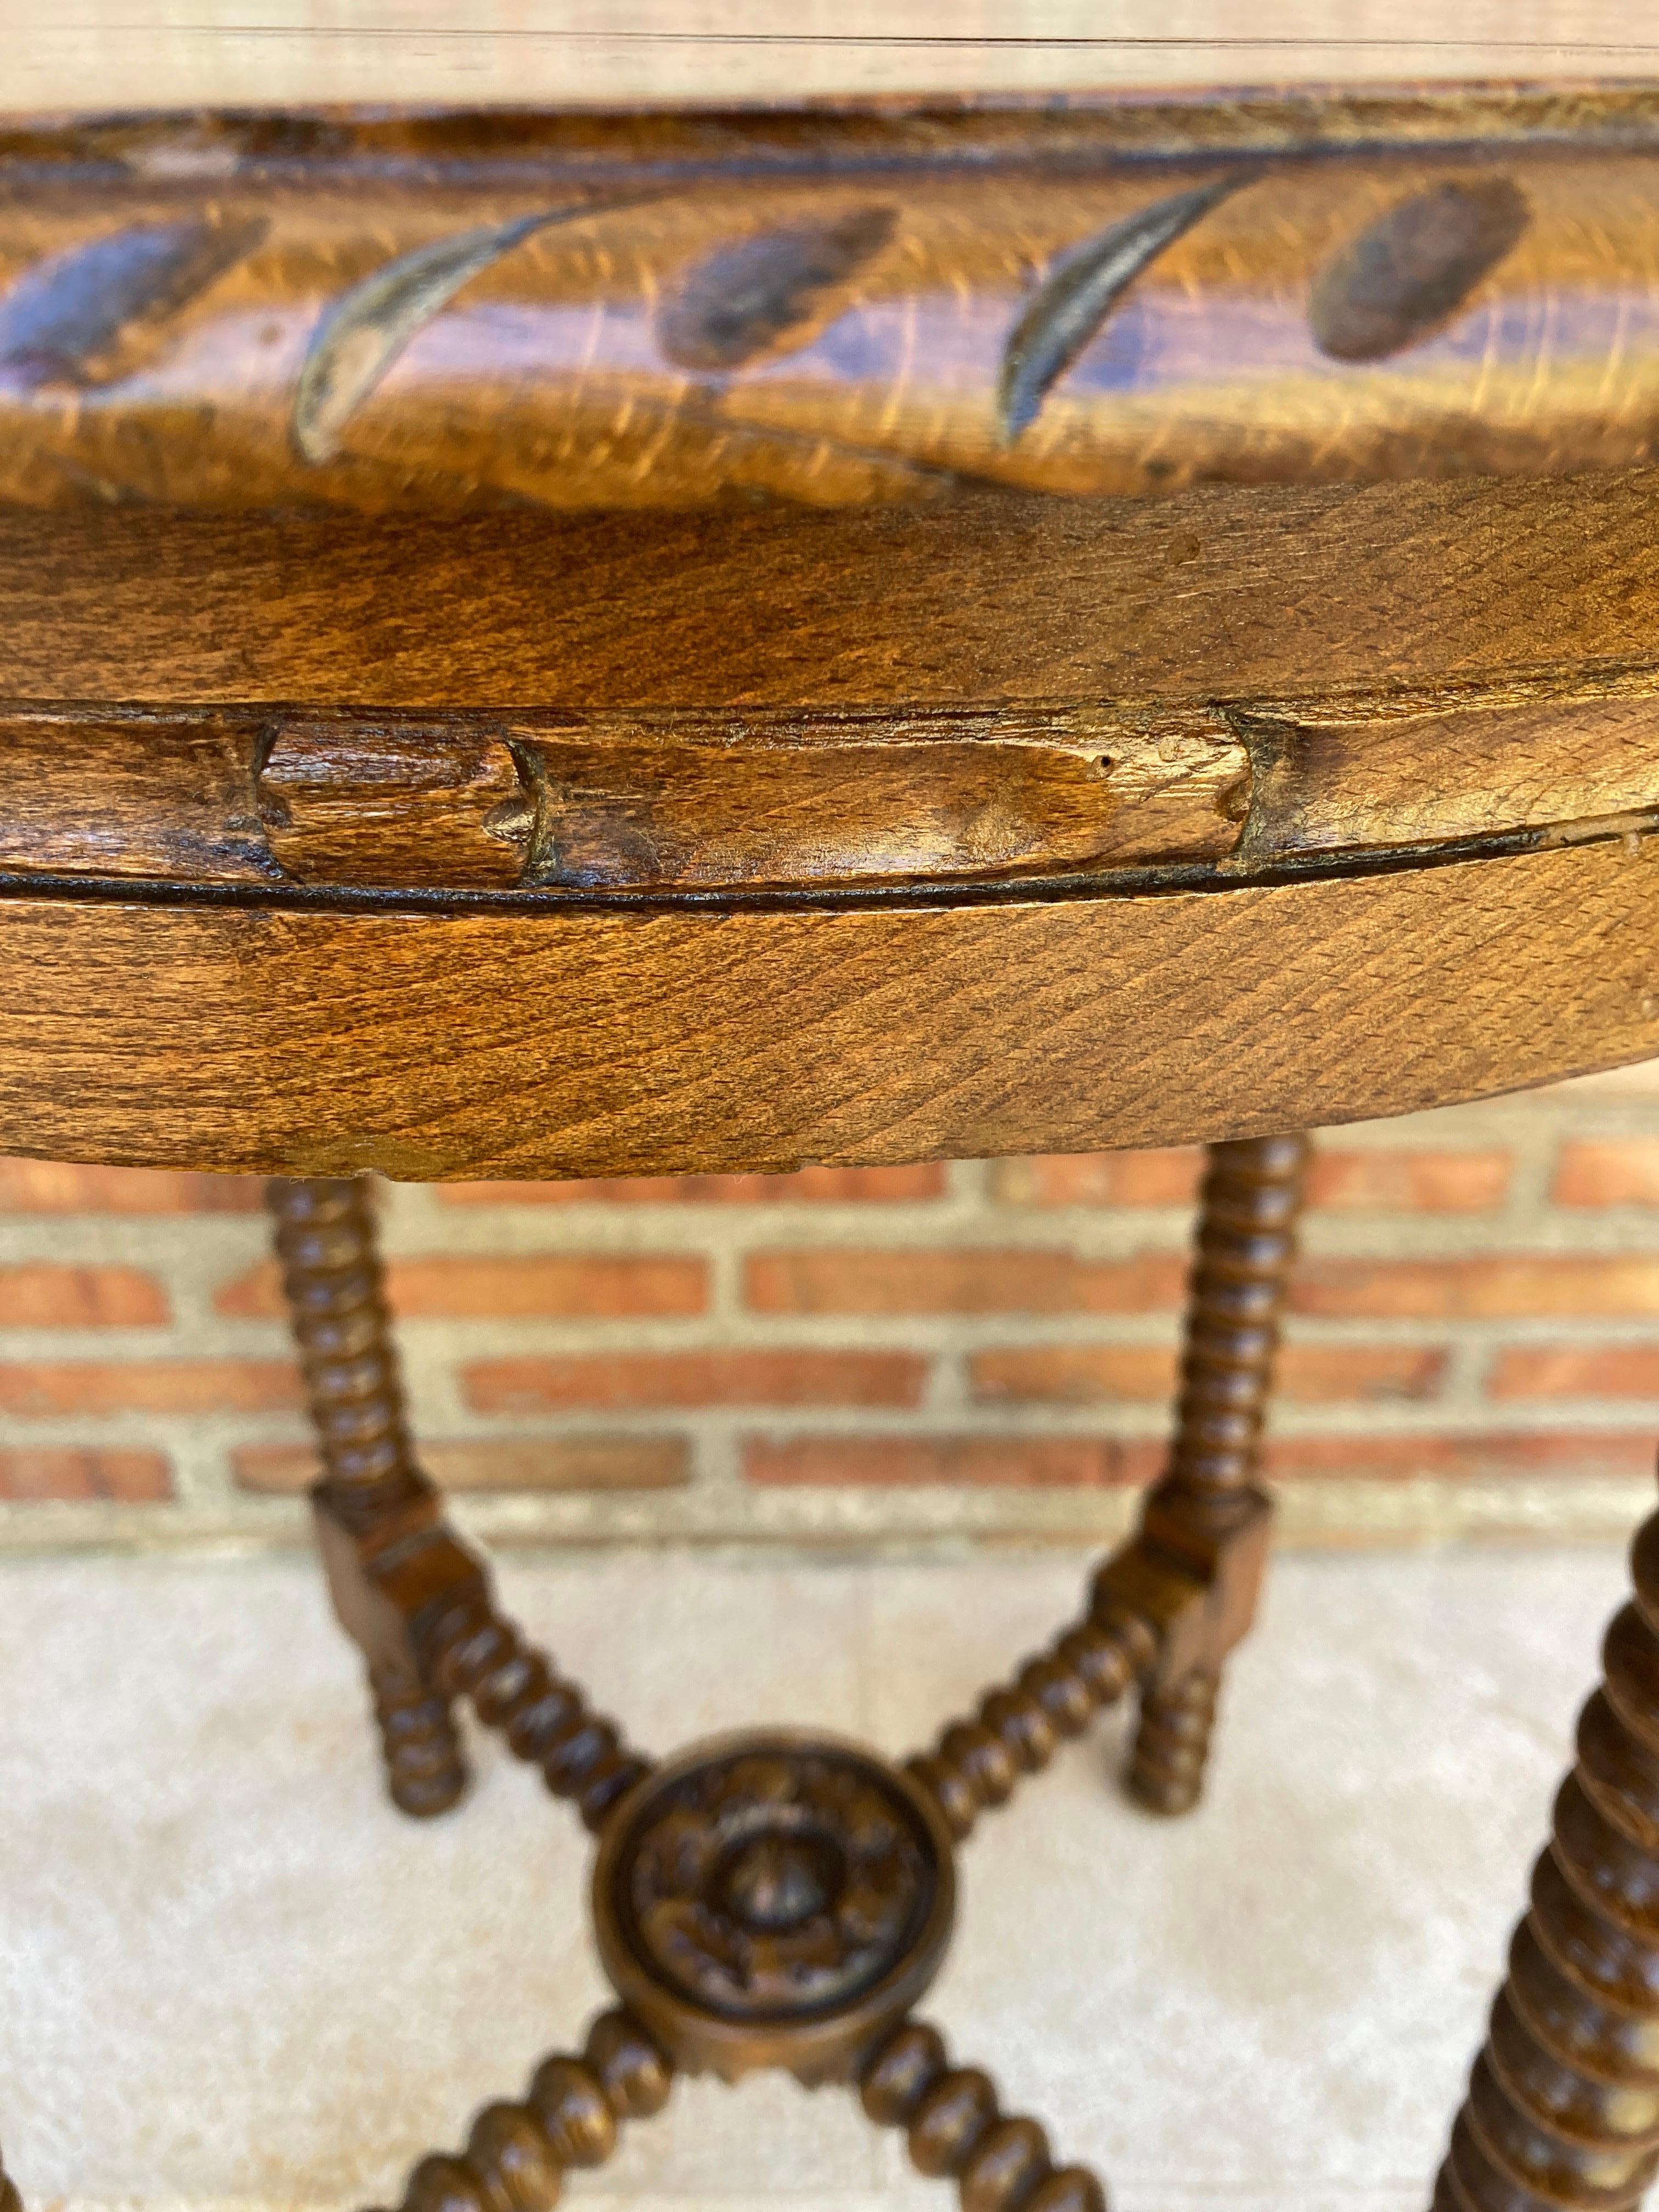 Spanish Round Walnut Side Table With Turned Legs And Beleveled Edges 1900s 2